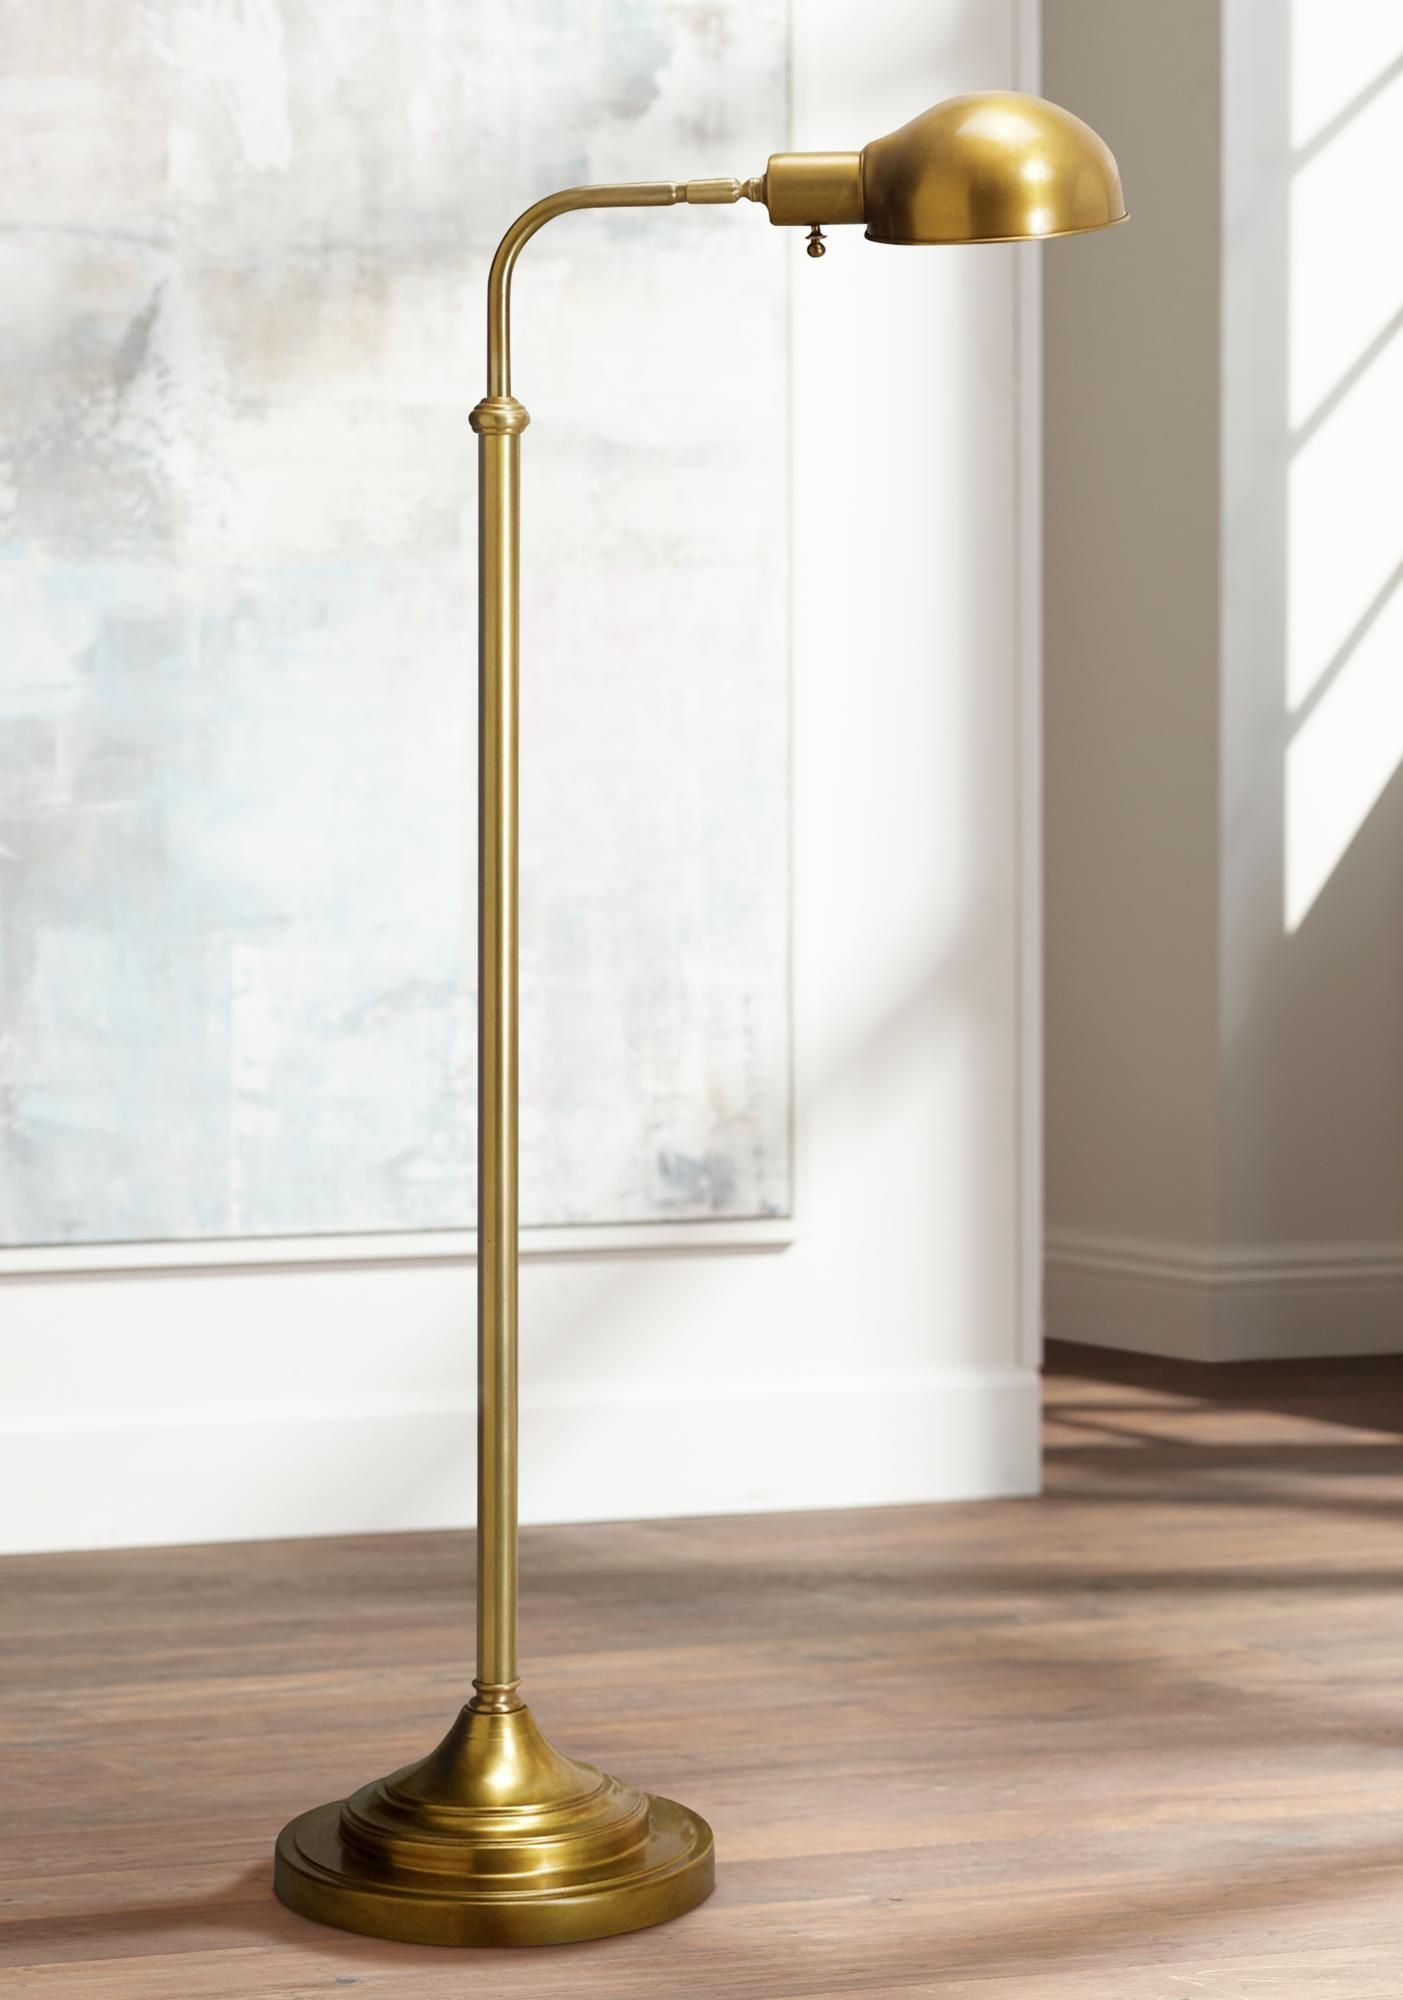 Robert Abbey Kinetic Antique Brass Pharmacy Floor Lamp throughout dimensions 1403 X 2000